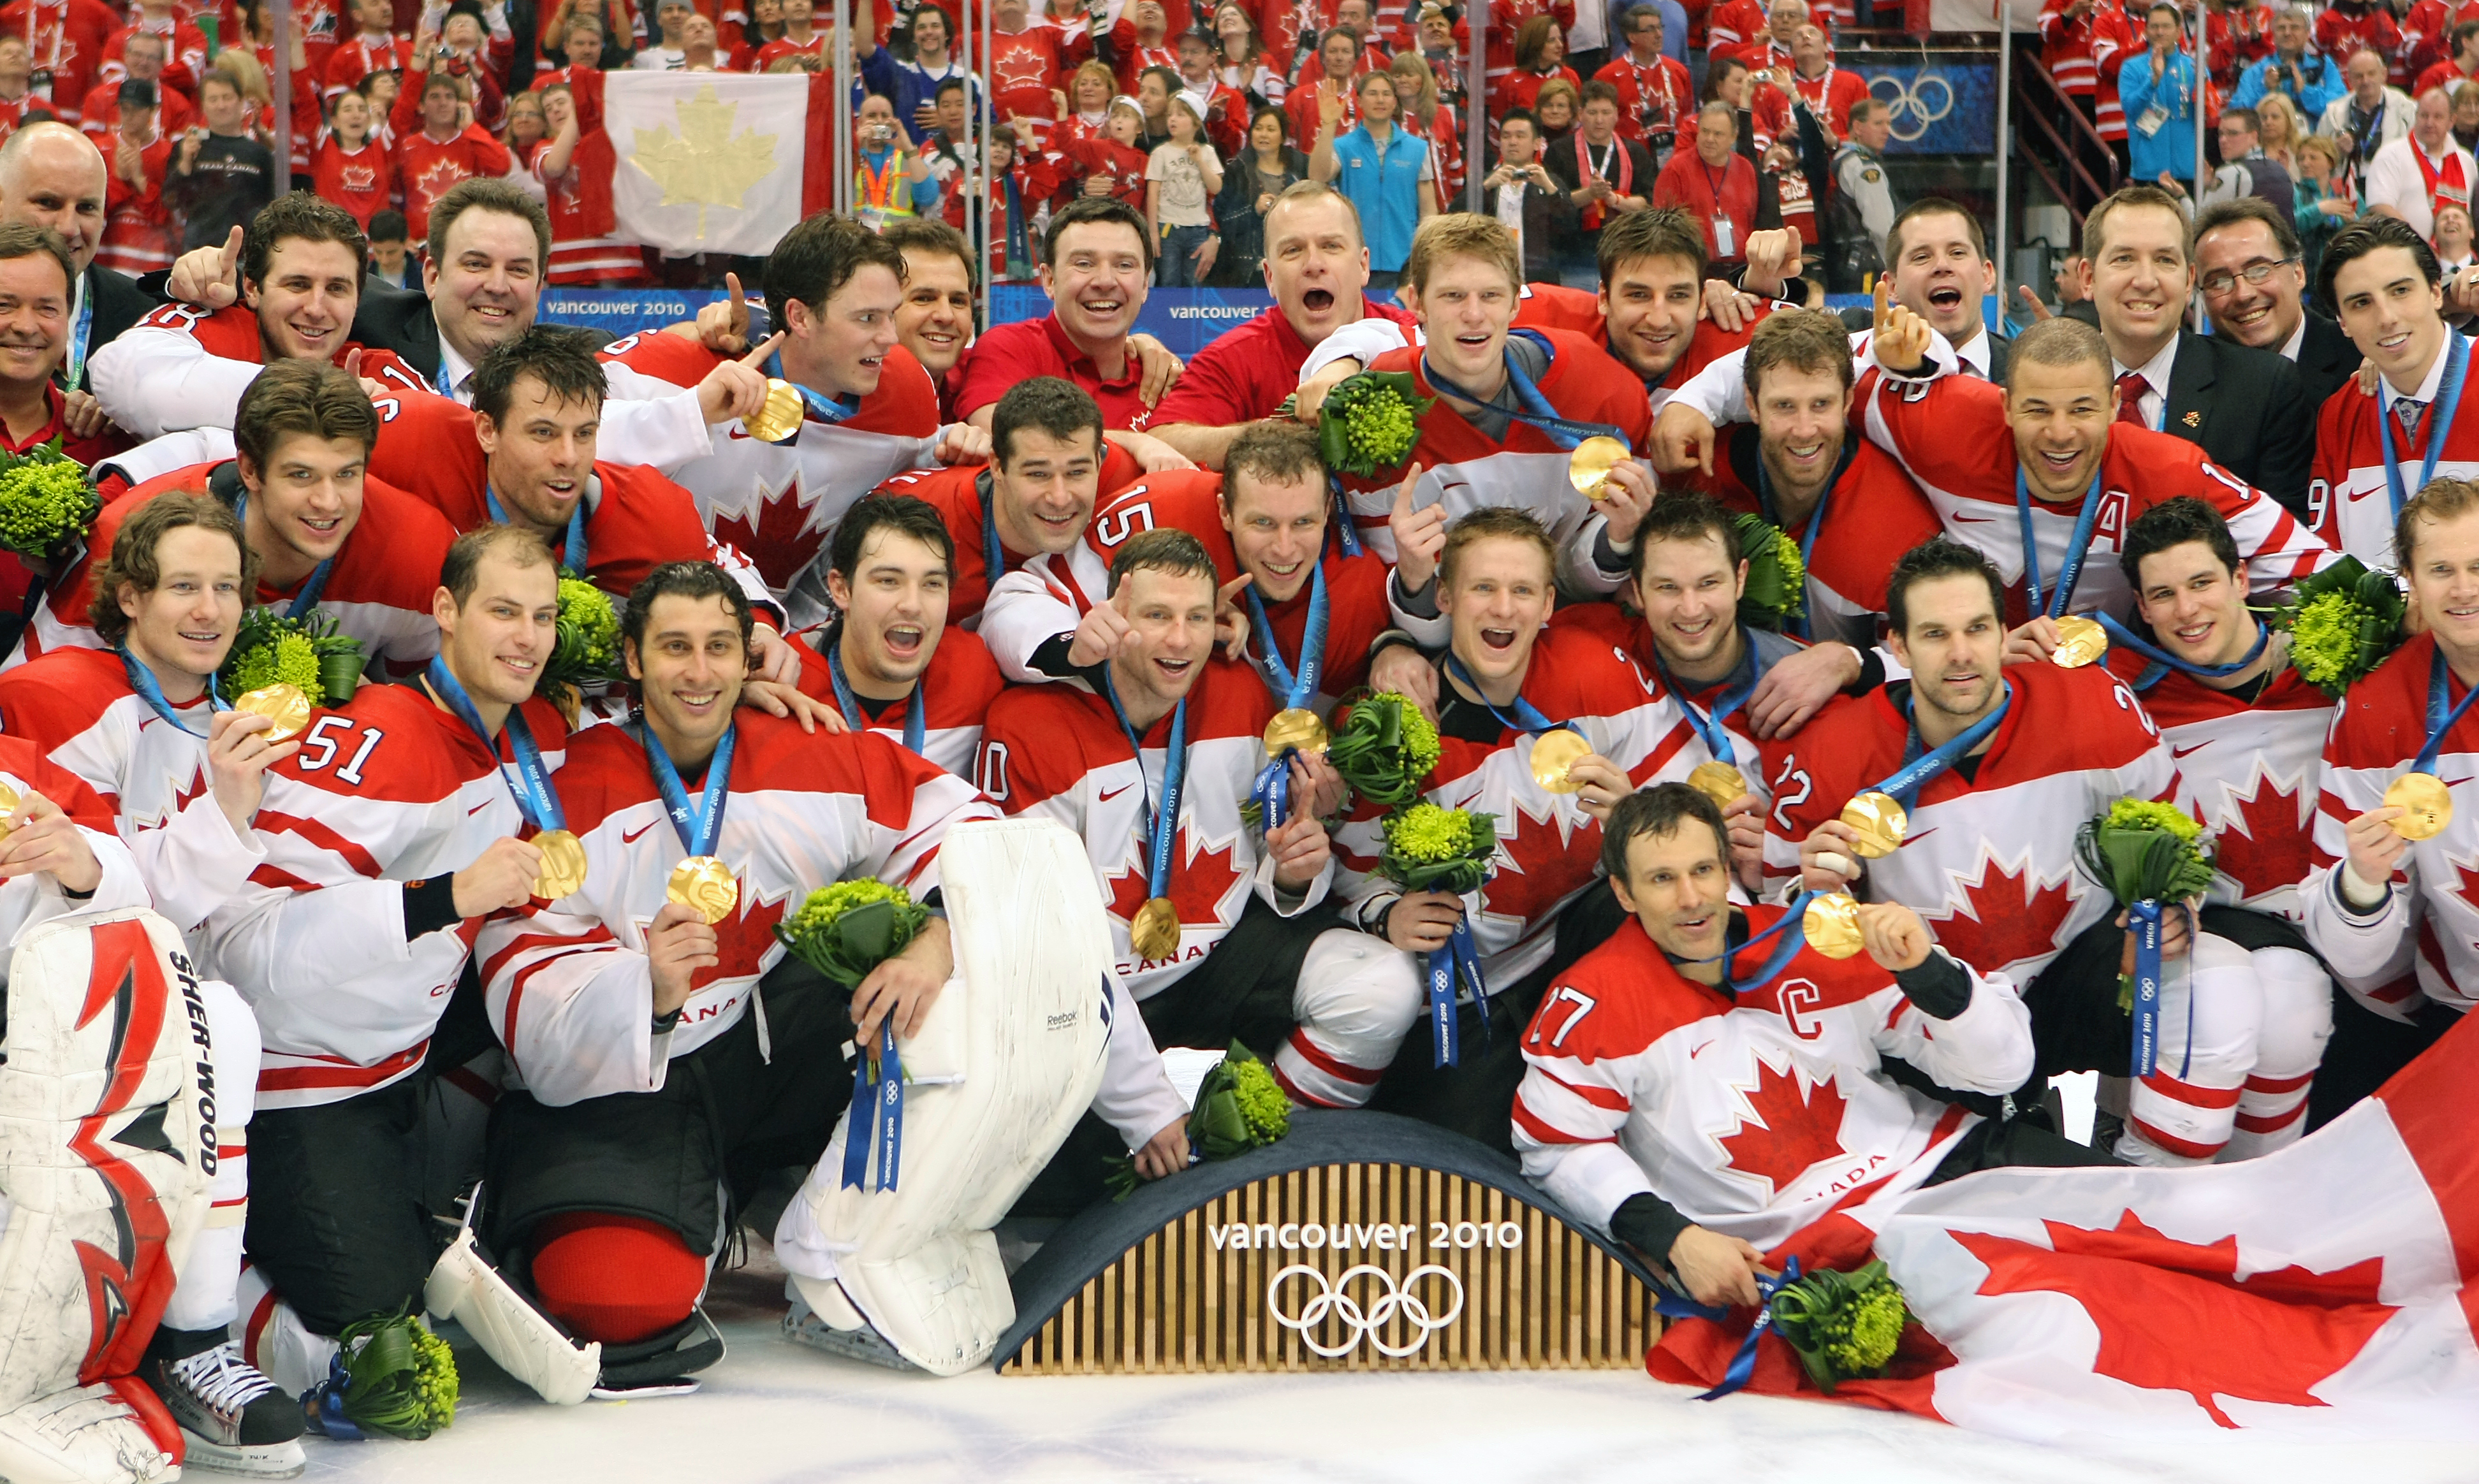 The men's hockey team pose with their gold medals at Vancouver 2010